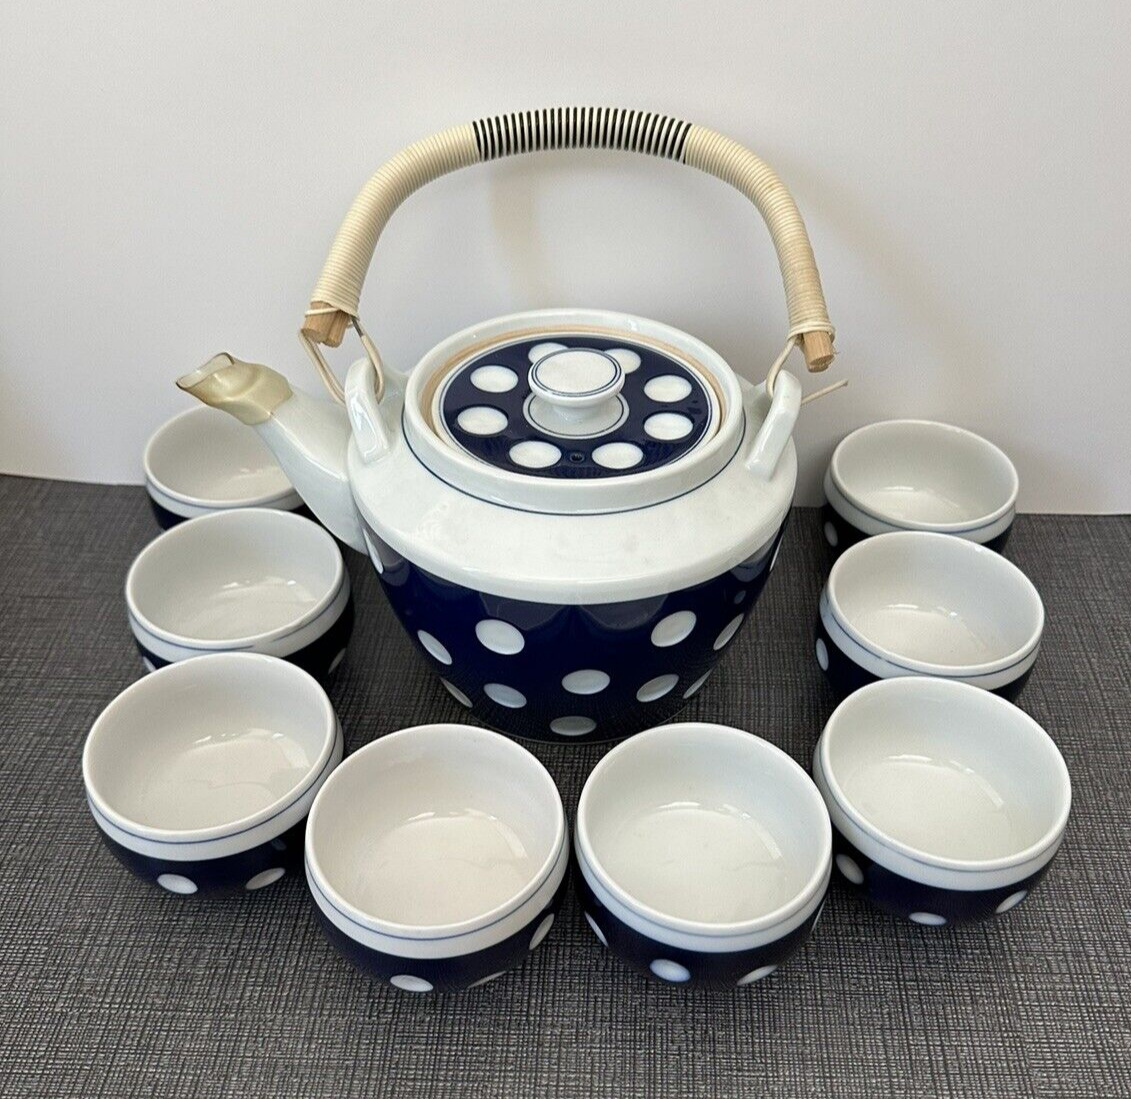 Vintage Japanese Blue & White Porcelain Tea Pot with White Polka Dots and 8 Cups